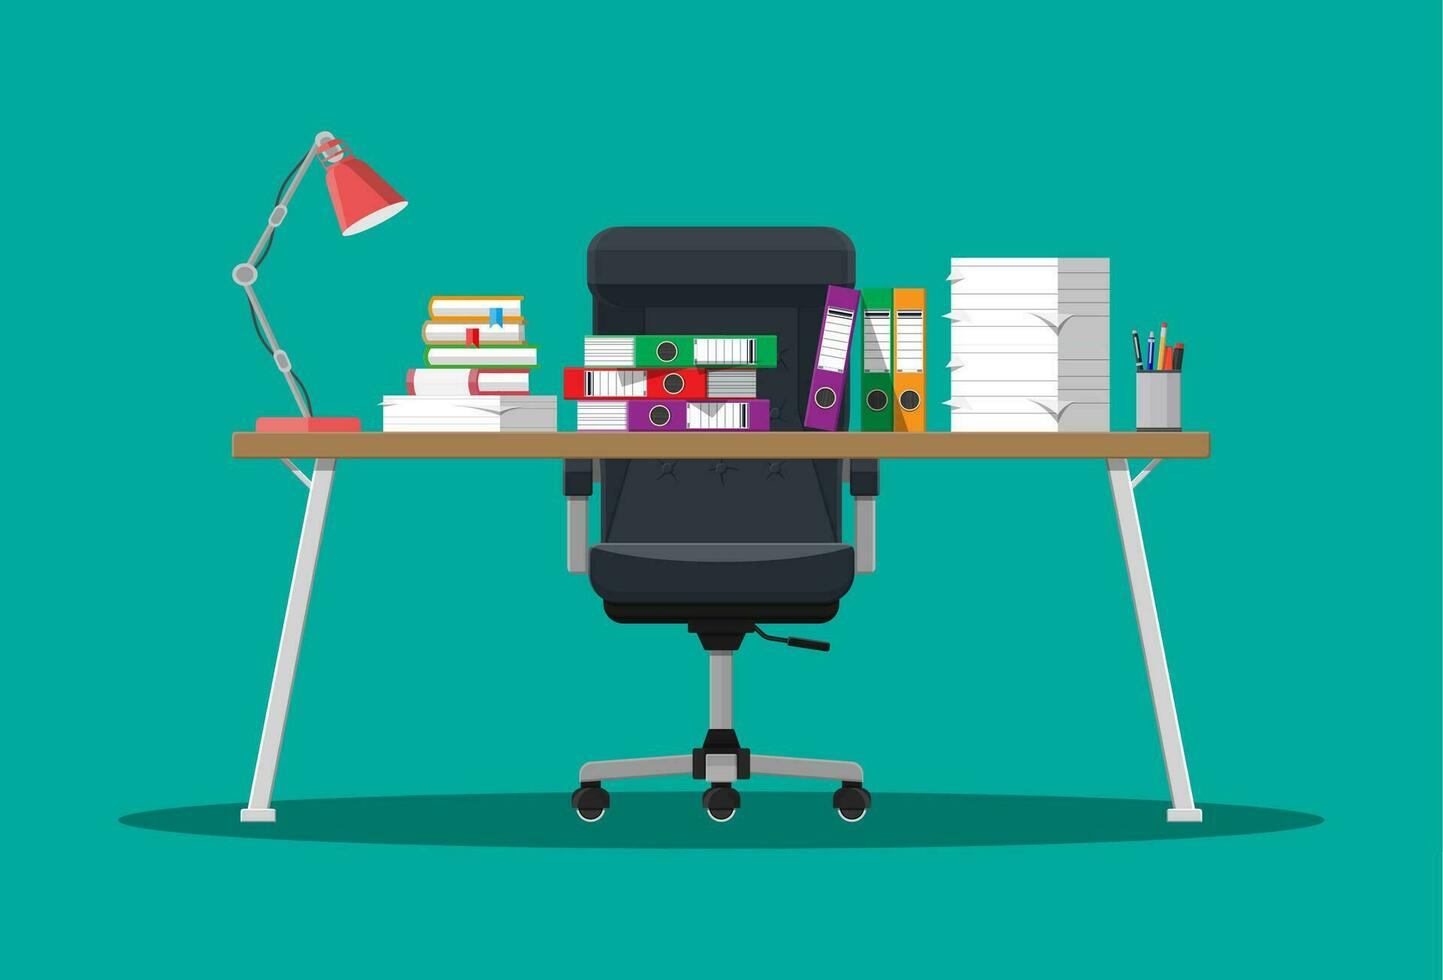 Pile of paper documents and file folders on office table. Paper stacks. Bureaucracy, paperwork, office. Chair, desk. Vector illustration in flat style